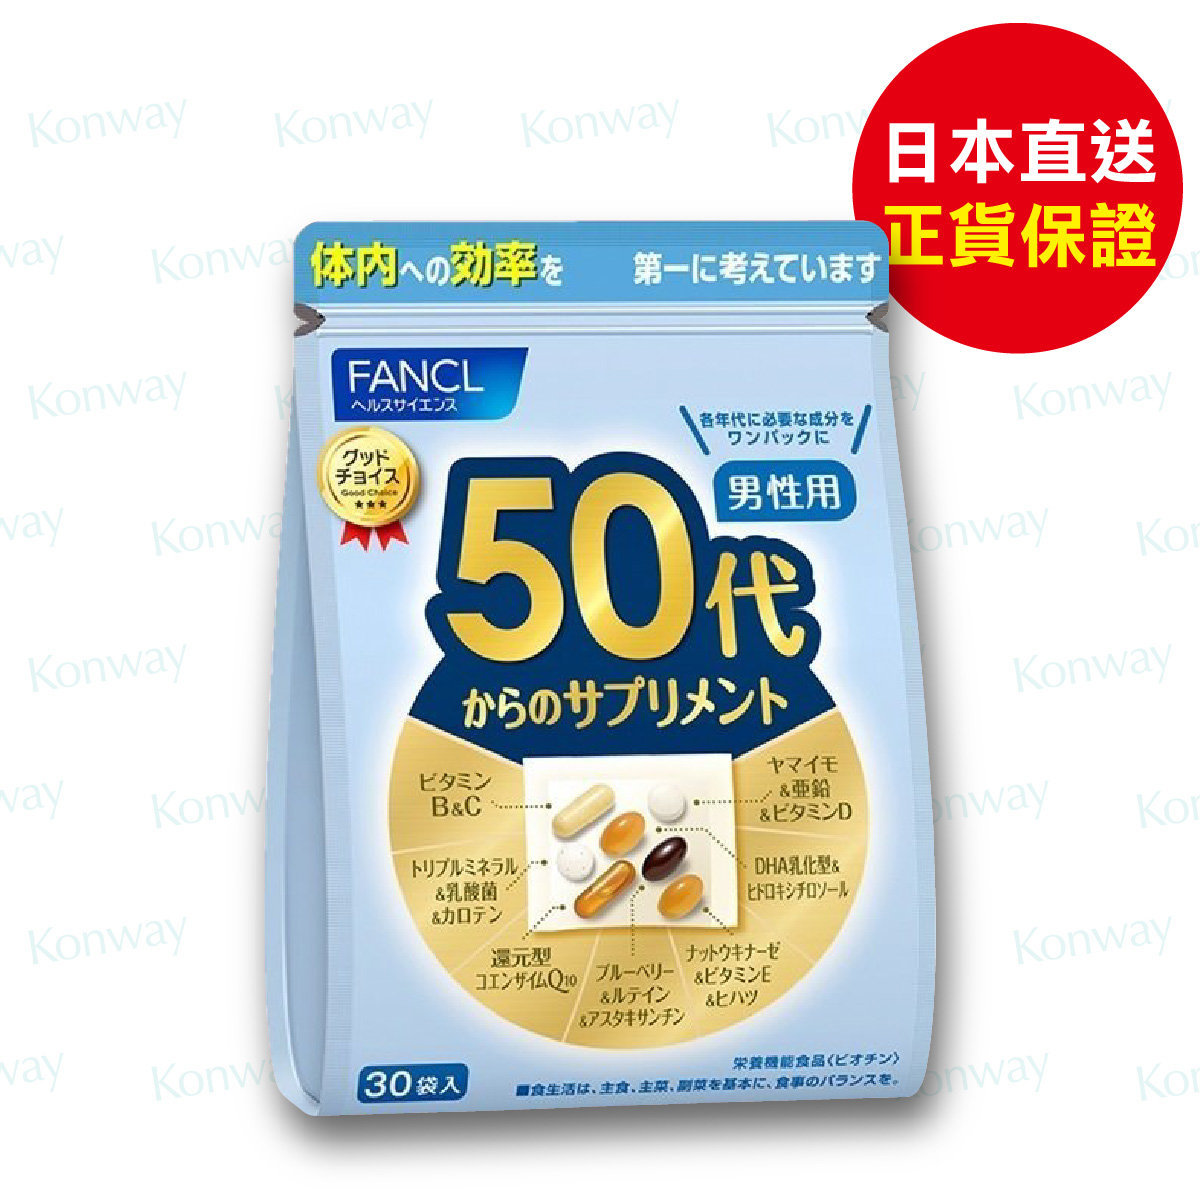 (New) Good Choice 50's Men Health Supplement (30 Bags) (Best Before: Jan 2025) Parallel Import